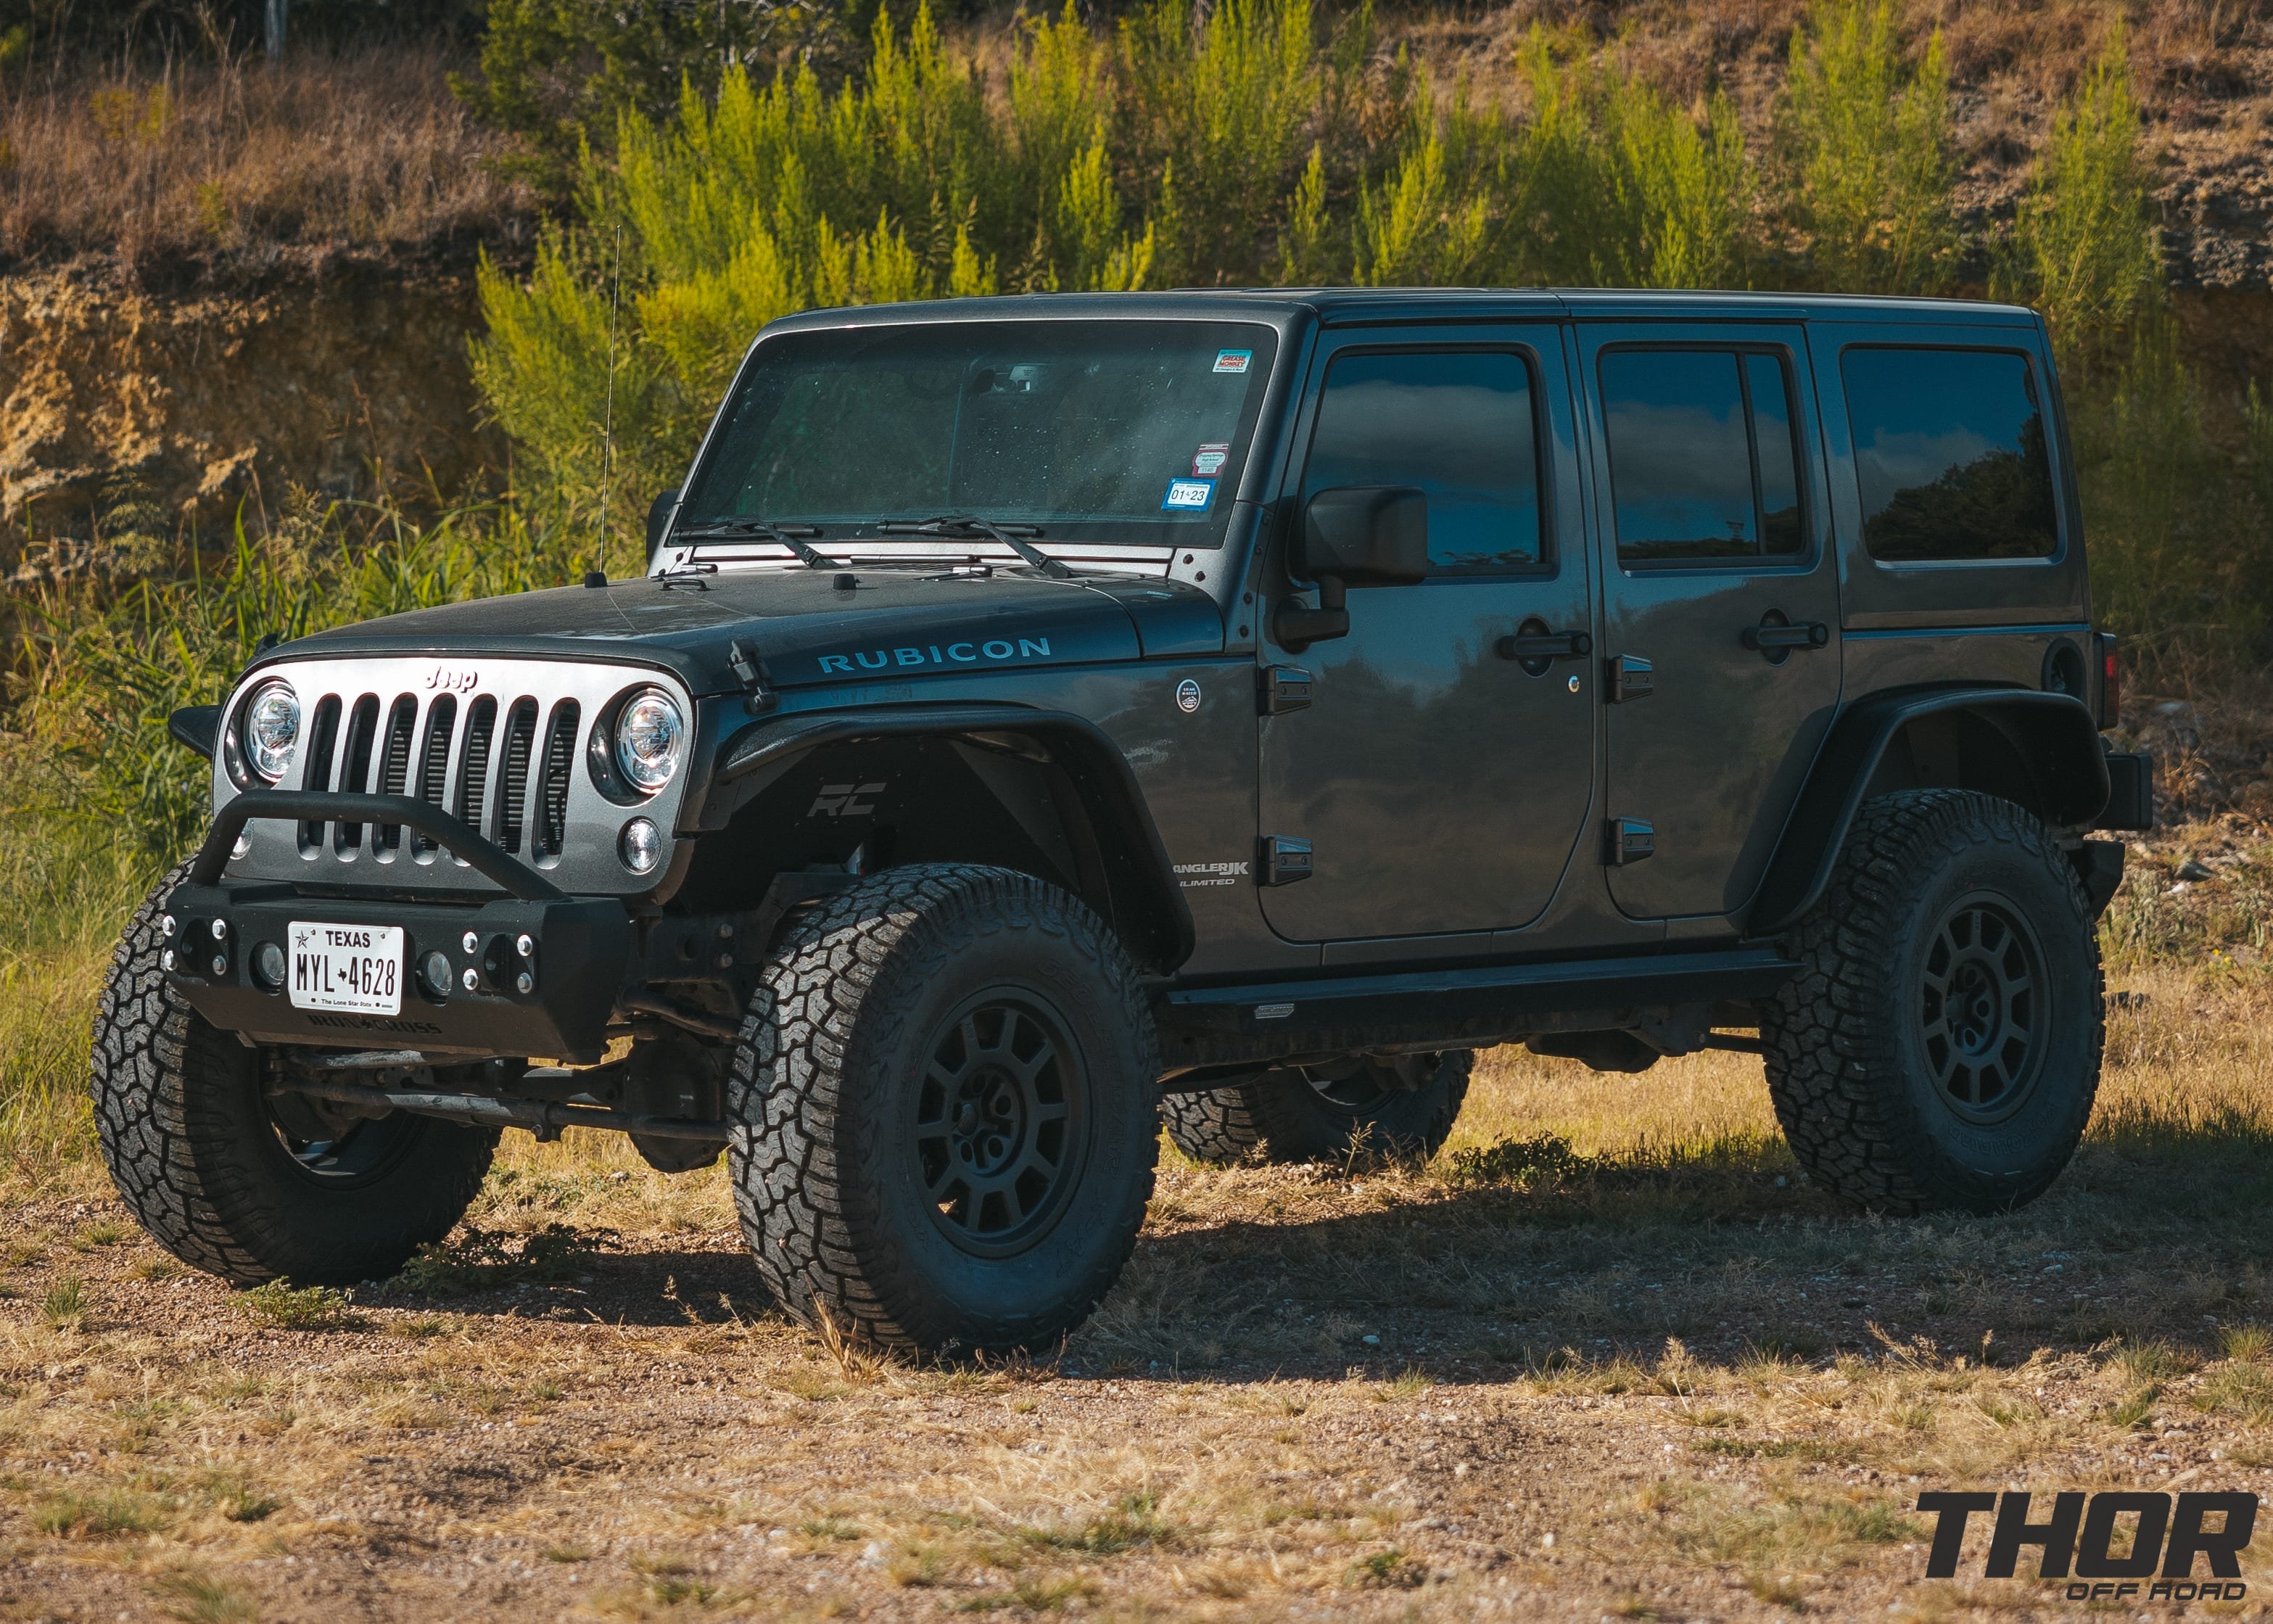 2018 Jeep Wrangler Unlimited Rubicon in Anvil Clearcoat with Rough Country 2.5" V2 Lift Kit, 17x8.5" AEV Salta Matte Black Wheels, 35x12.50R17 Yokohama Geolander X-AT Tires, Fender Flares